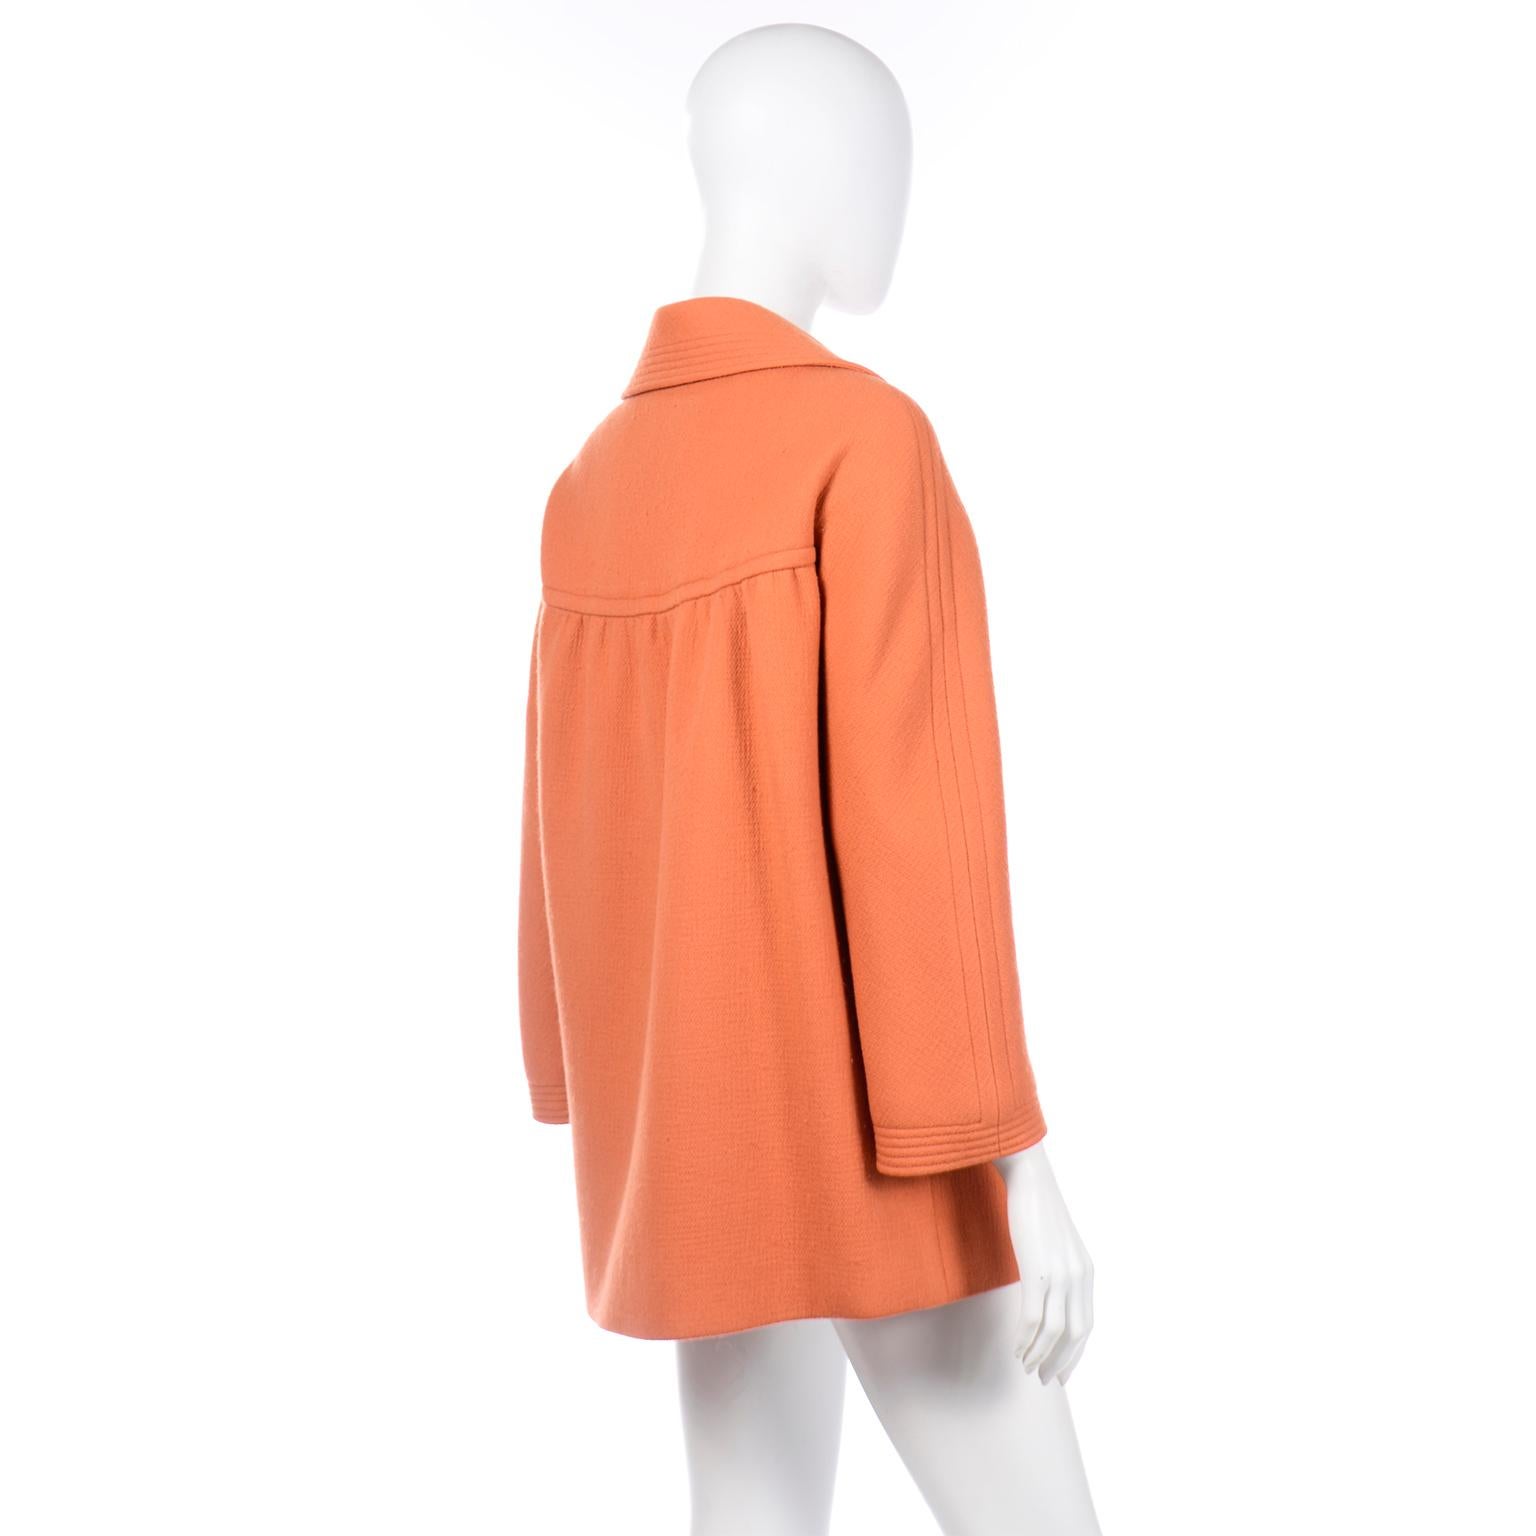 Pierre Cardin Vintage Orange Wool Jacket or Short Coat Late 1960s Early 1970s In Good Condition For Sale In Portland, OR